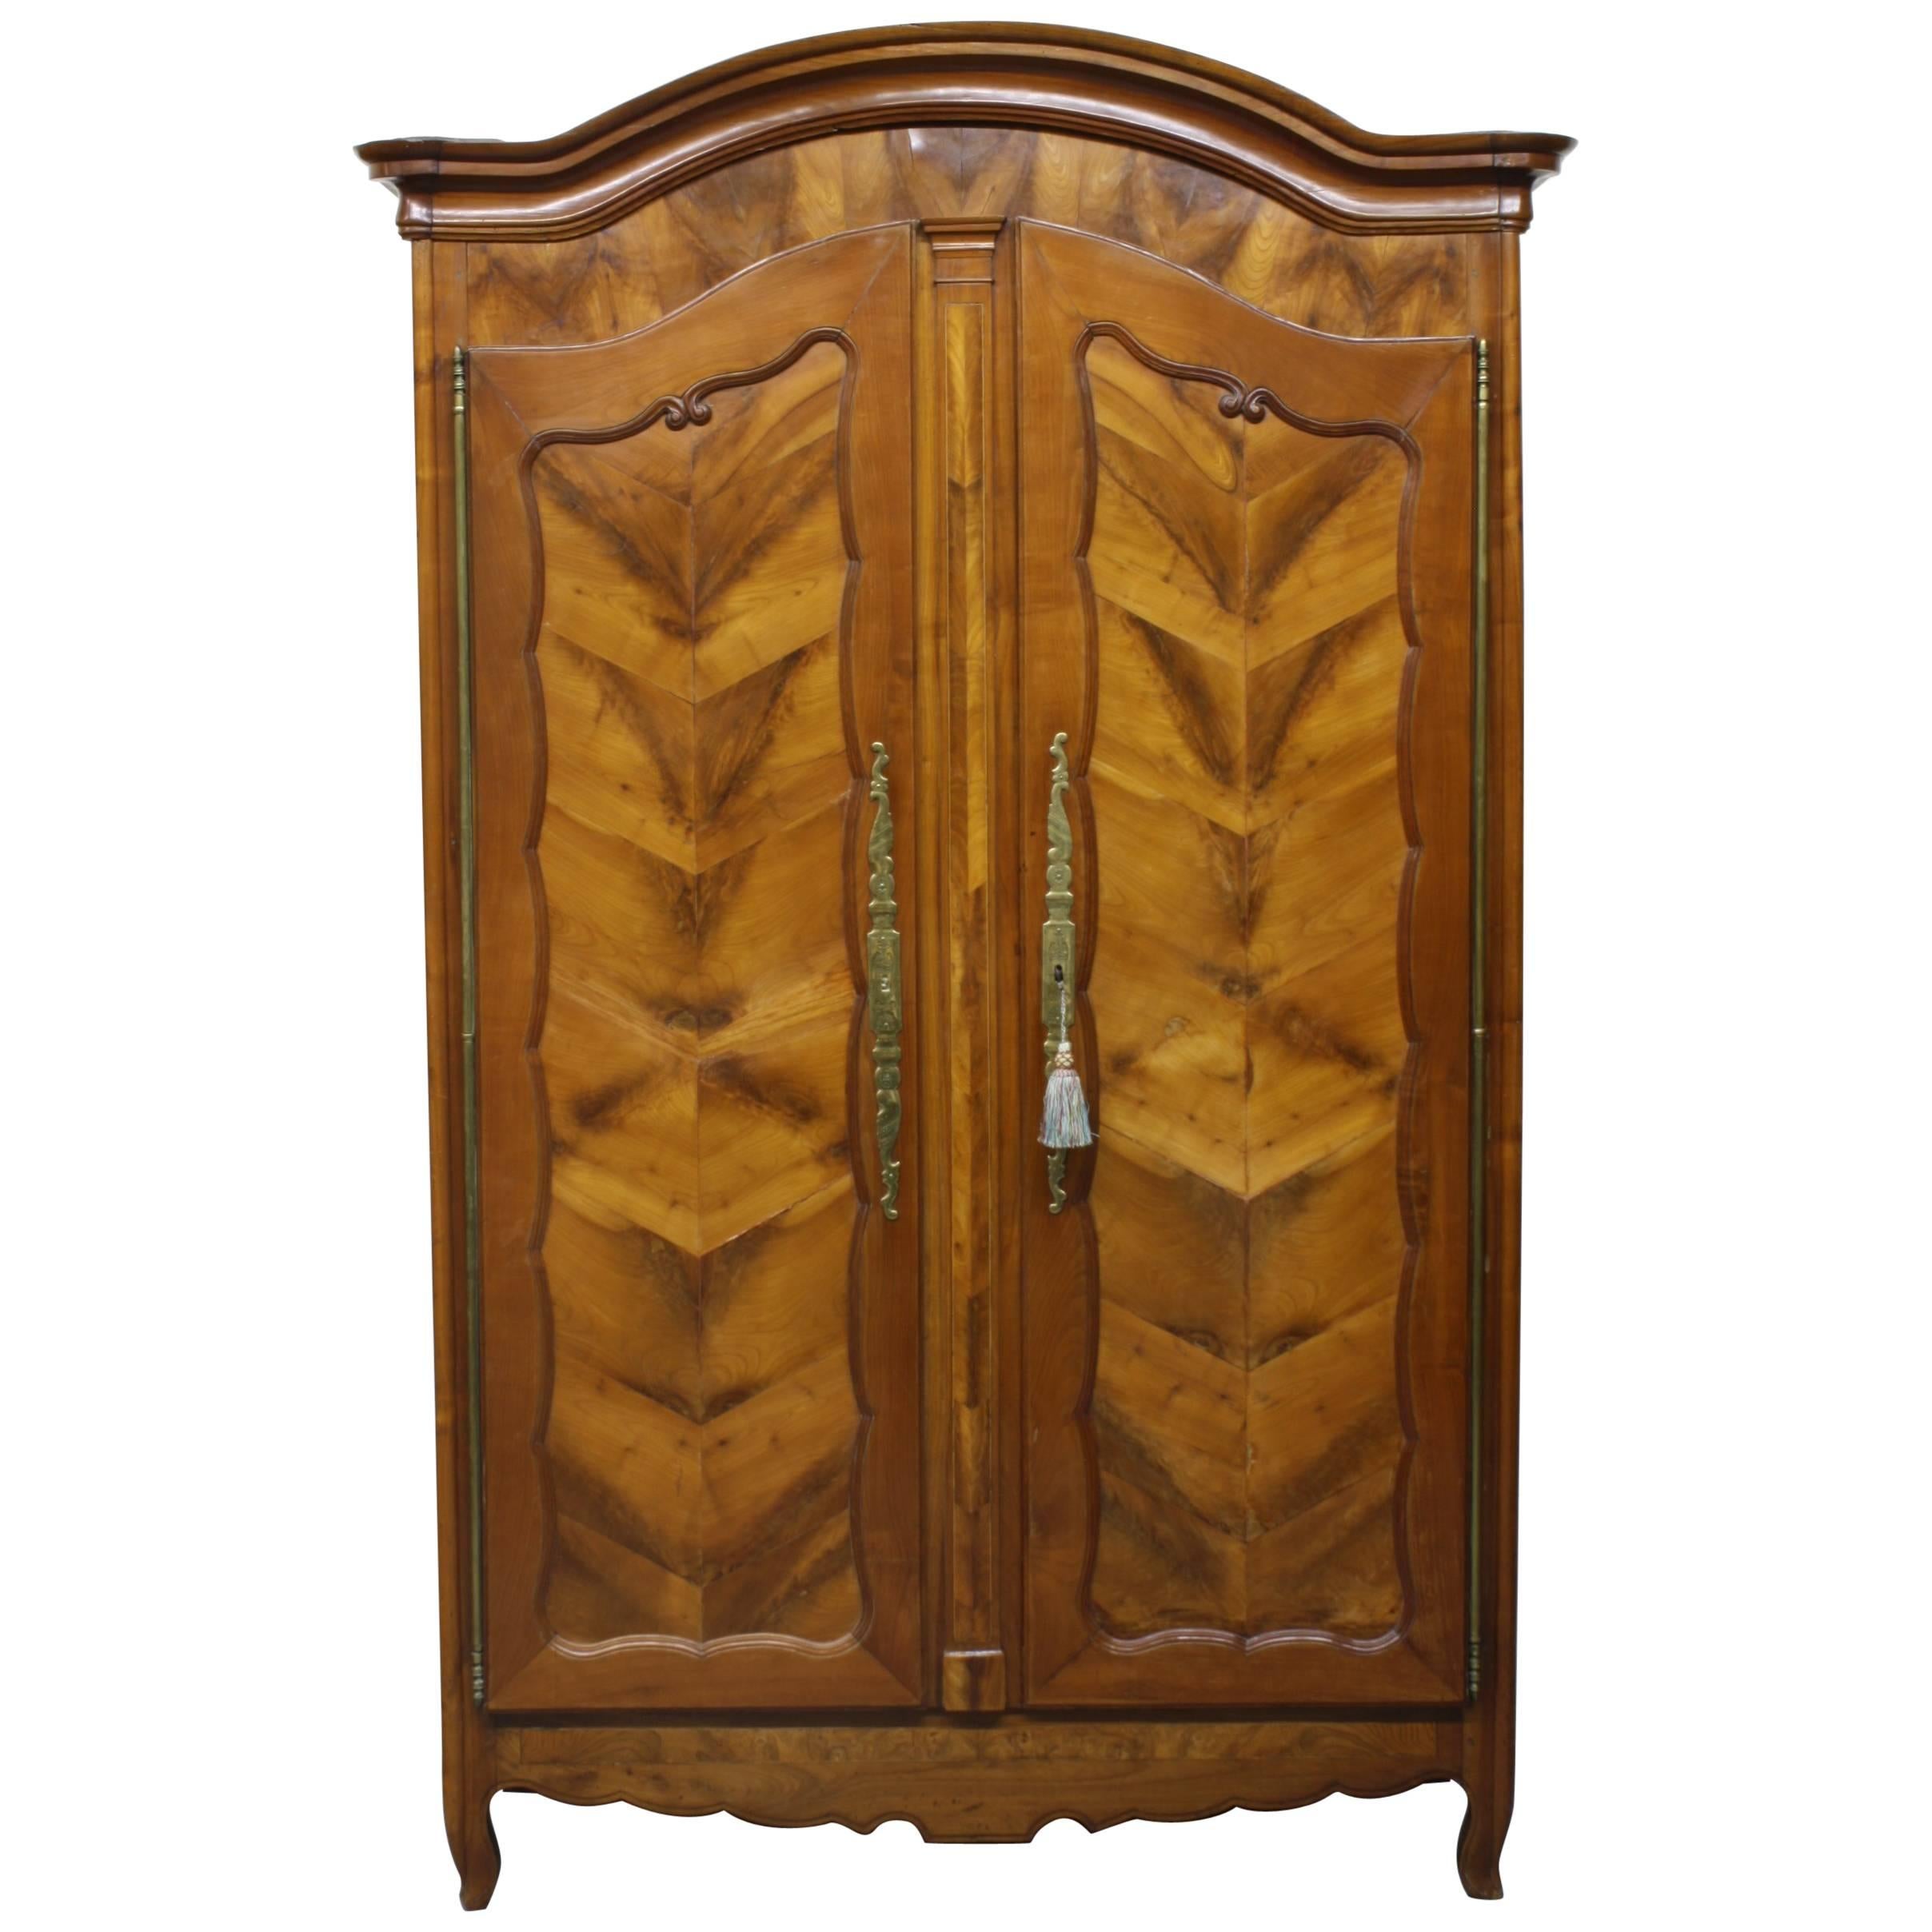 French Wild Cherry "Fougère" Armoire